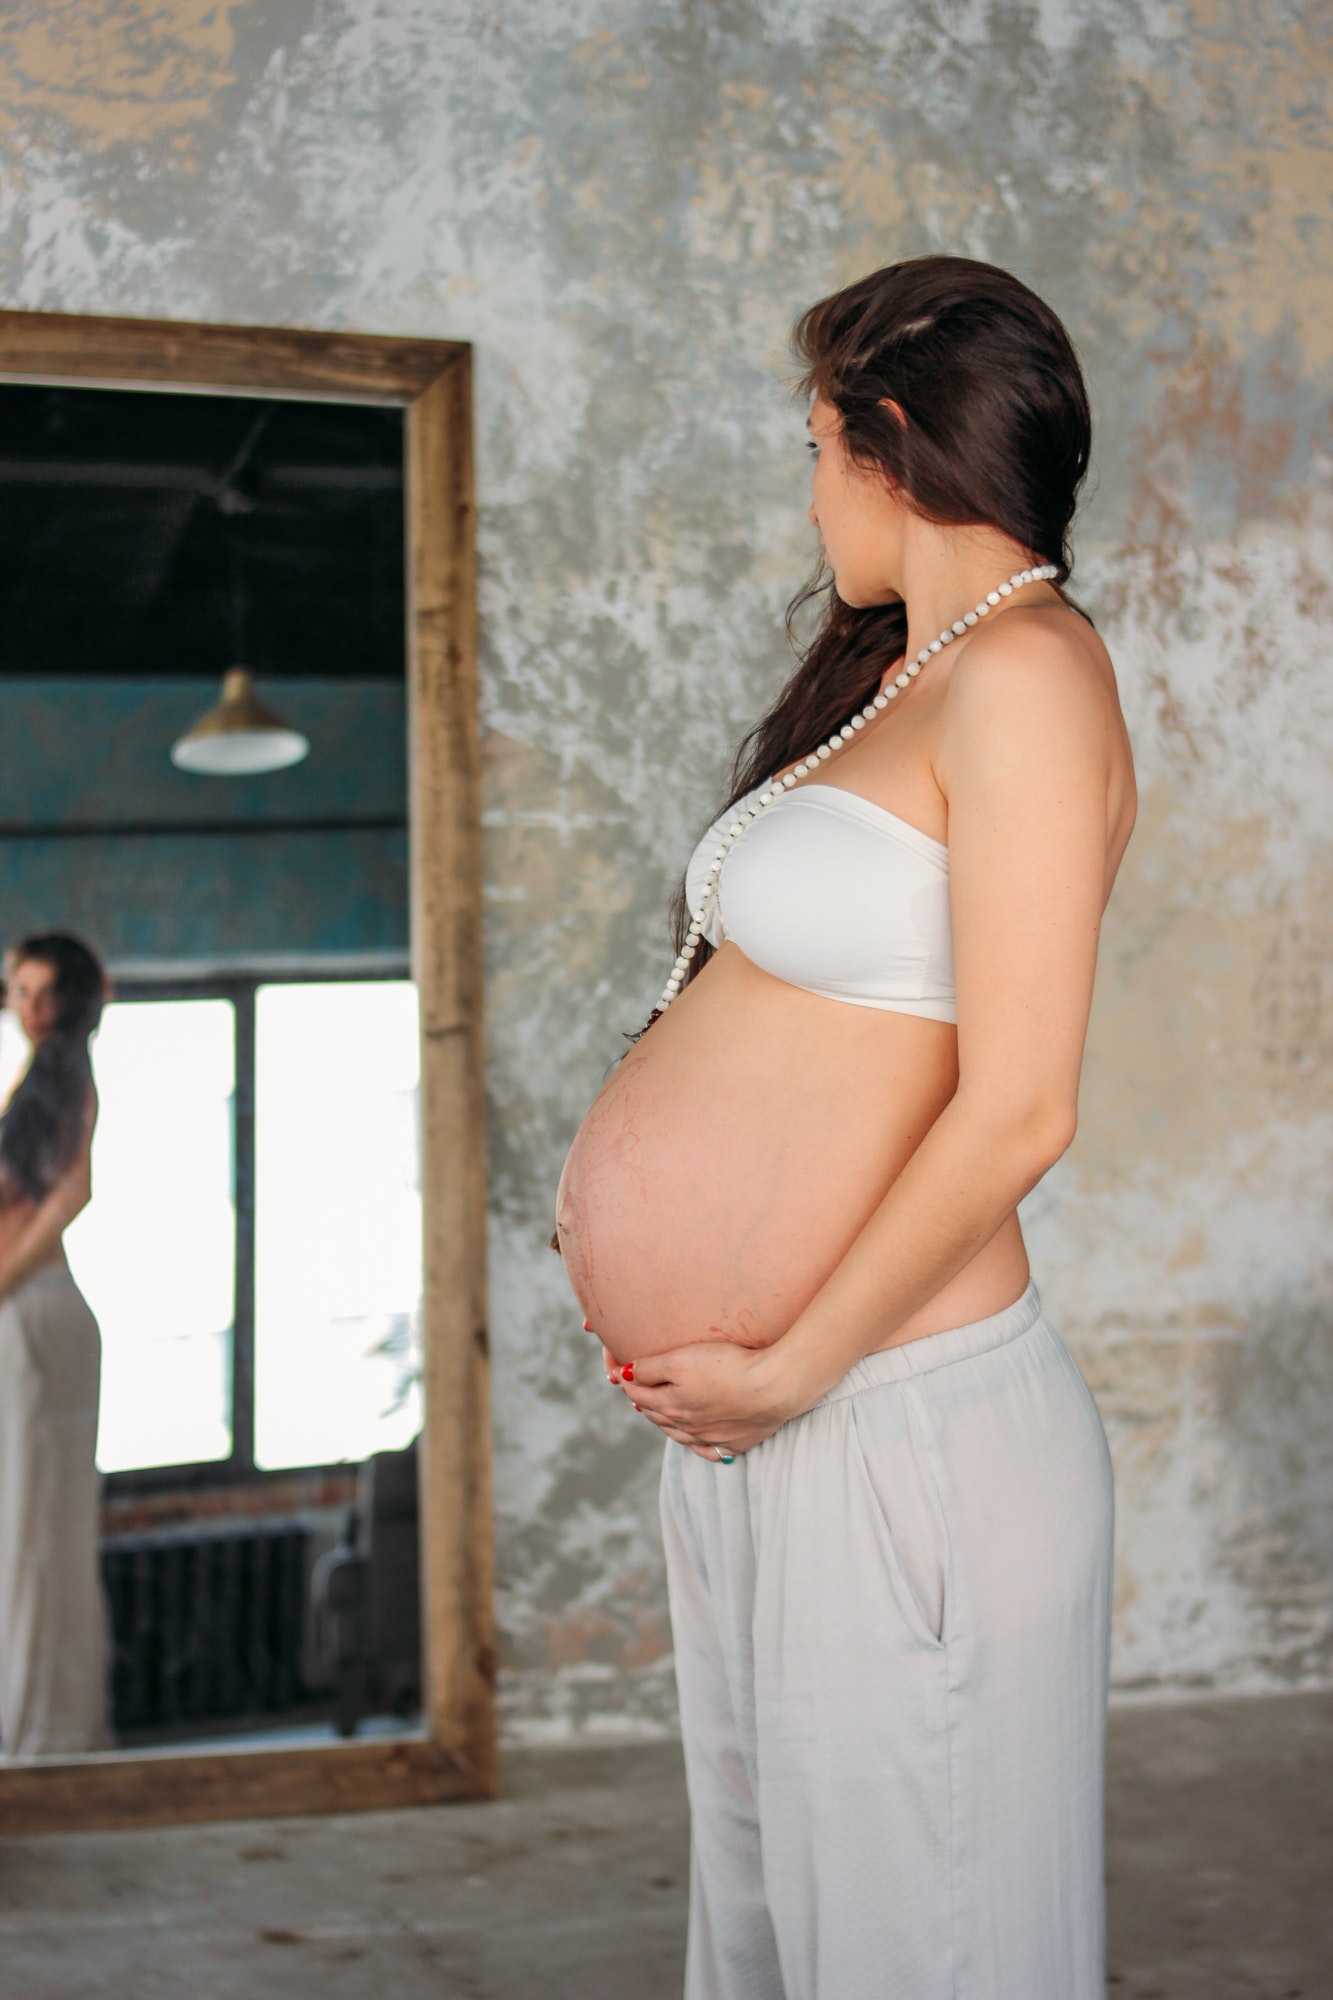 Tall beautiful pregnant girl young woman with long curly hair standing in front of the mirror in